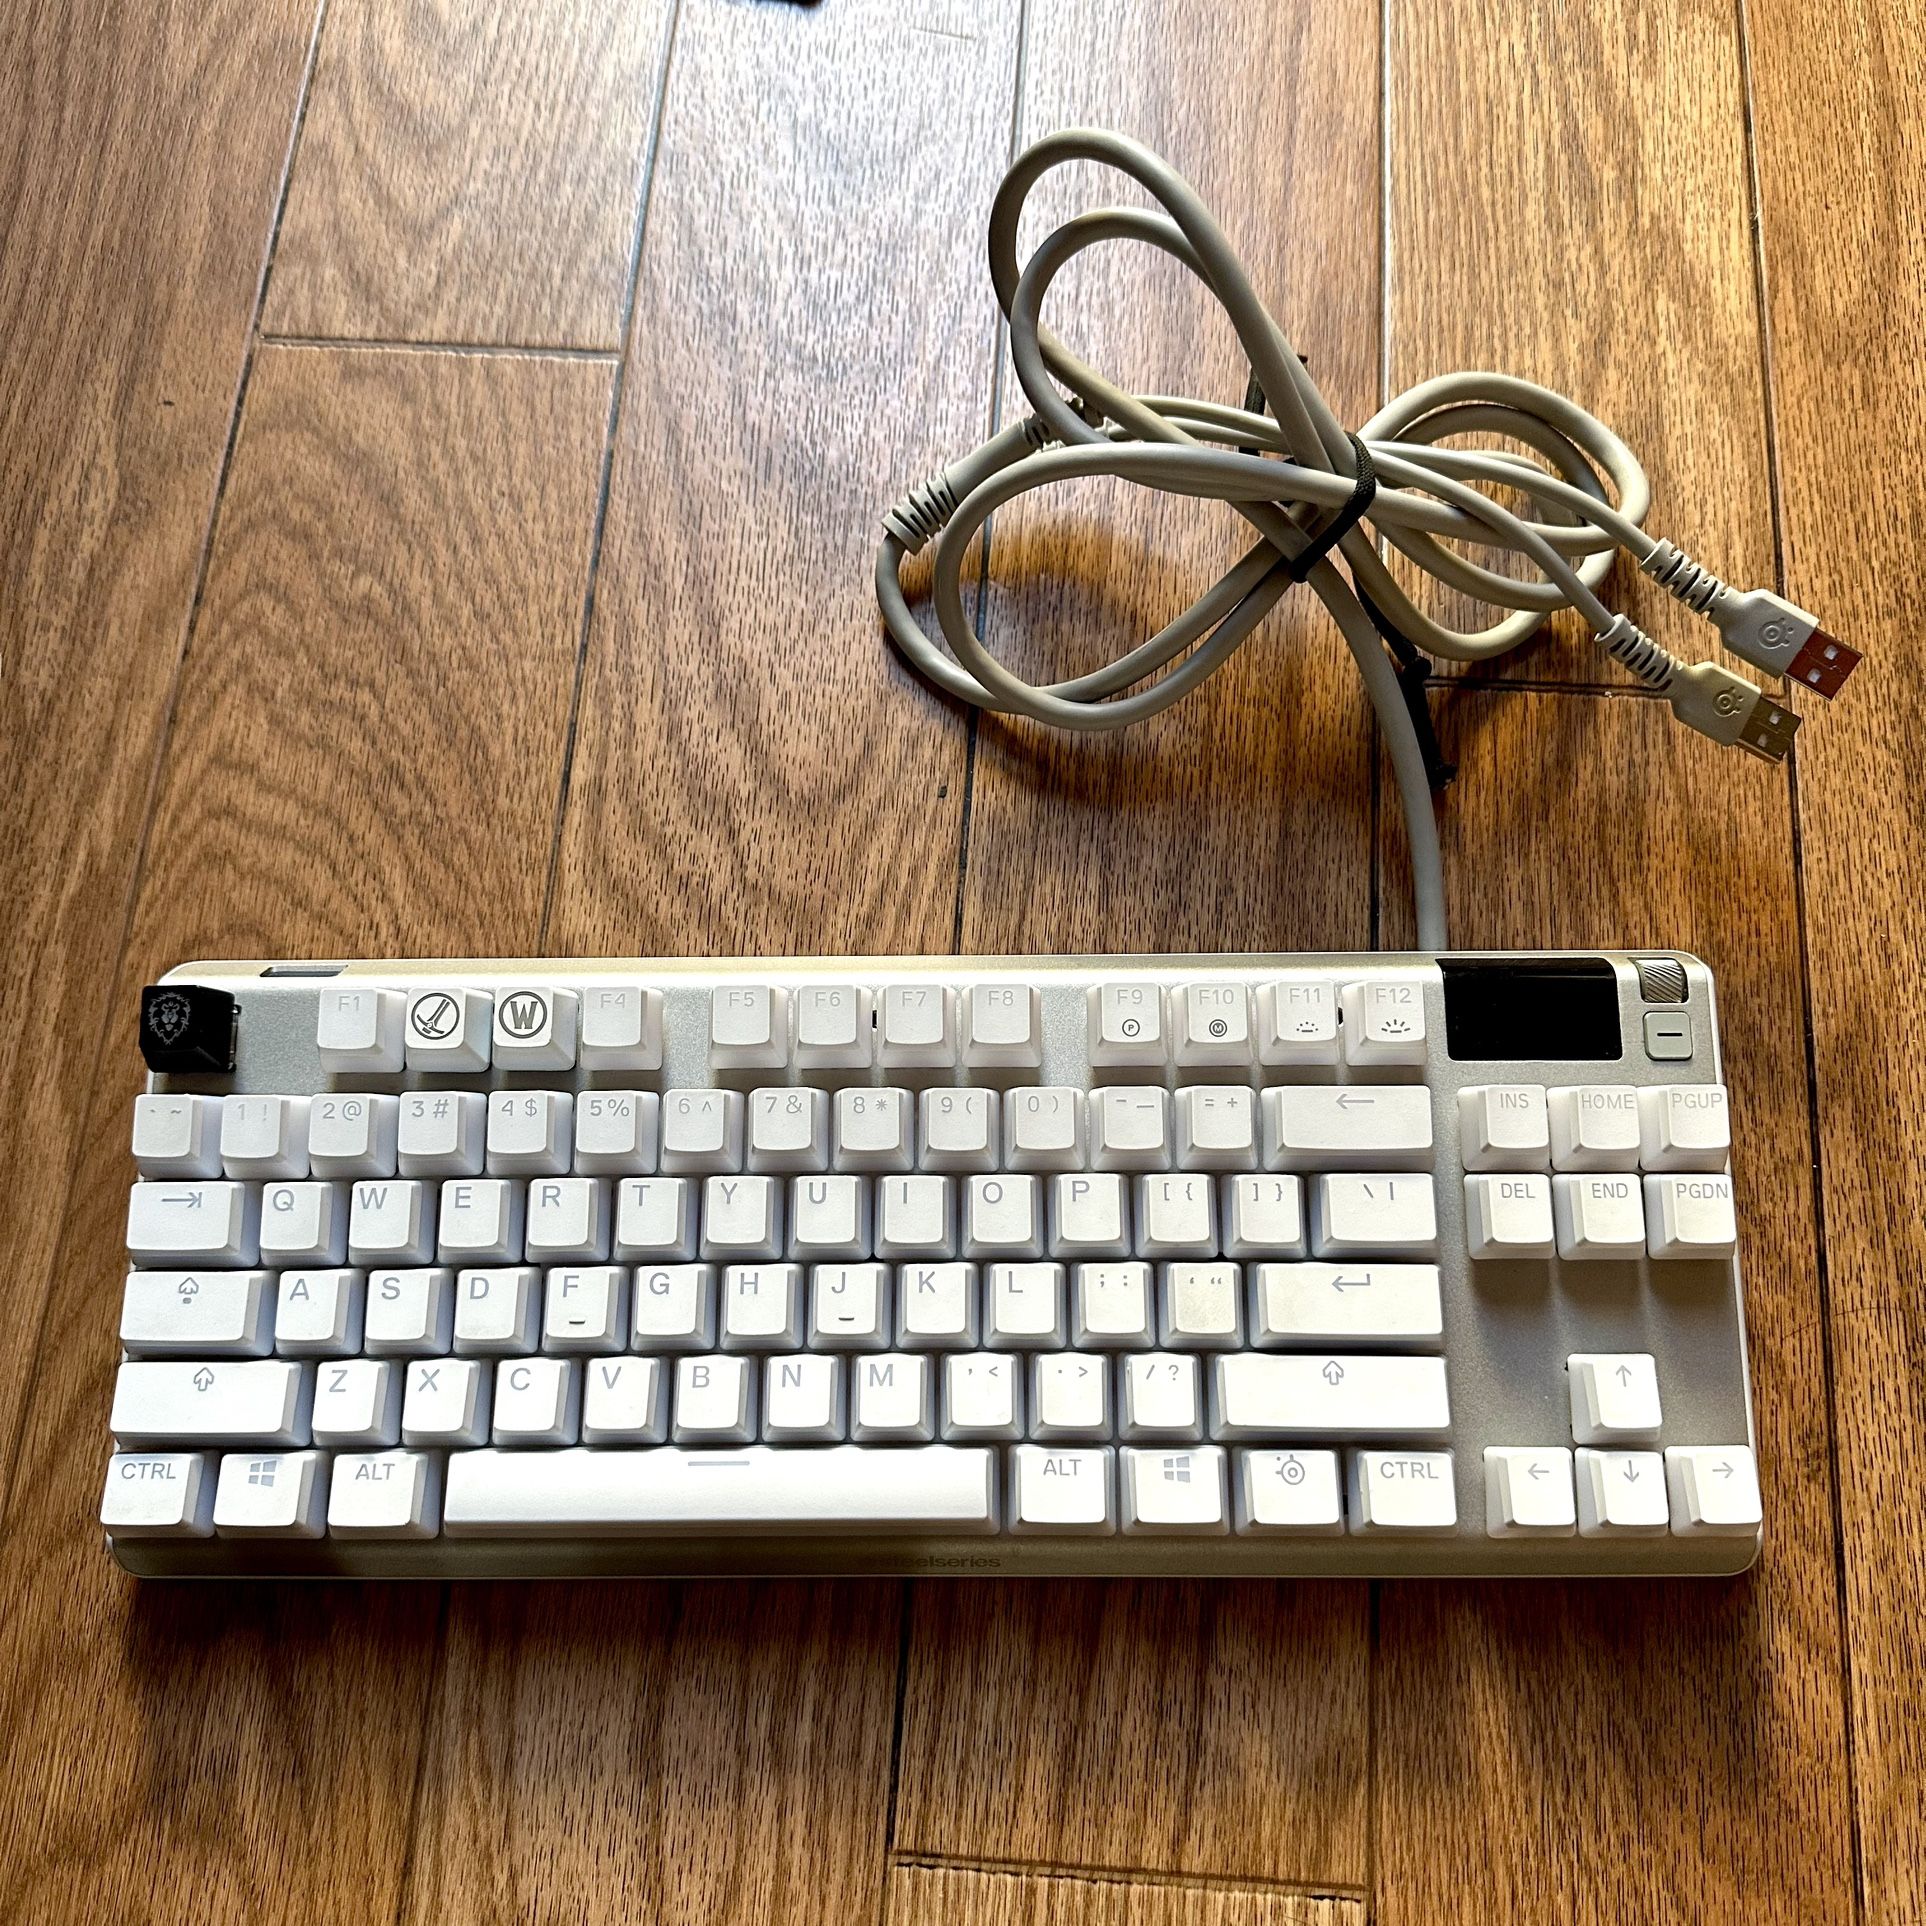 Apex 7 Tkl Ghost In Excellent Condition Keyboard